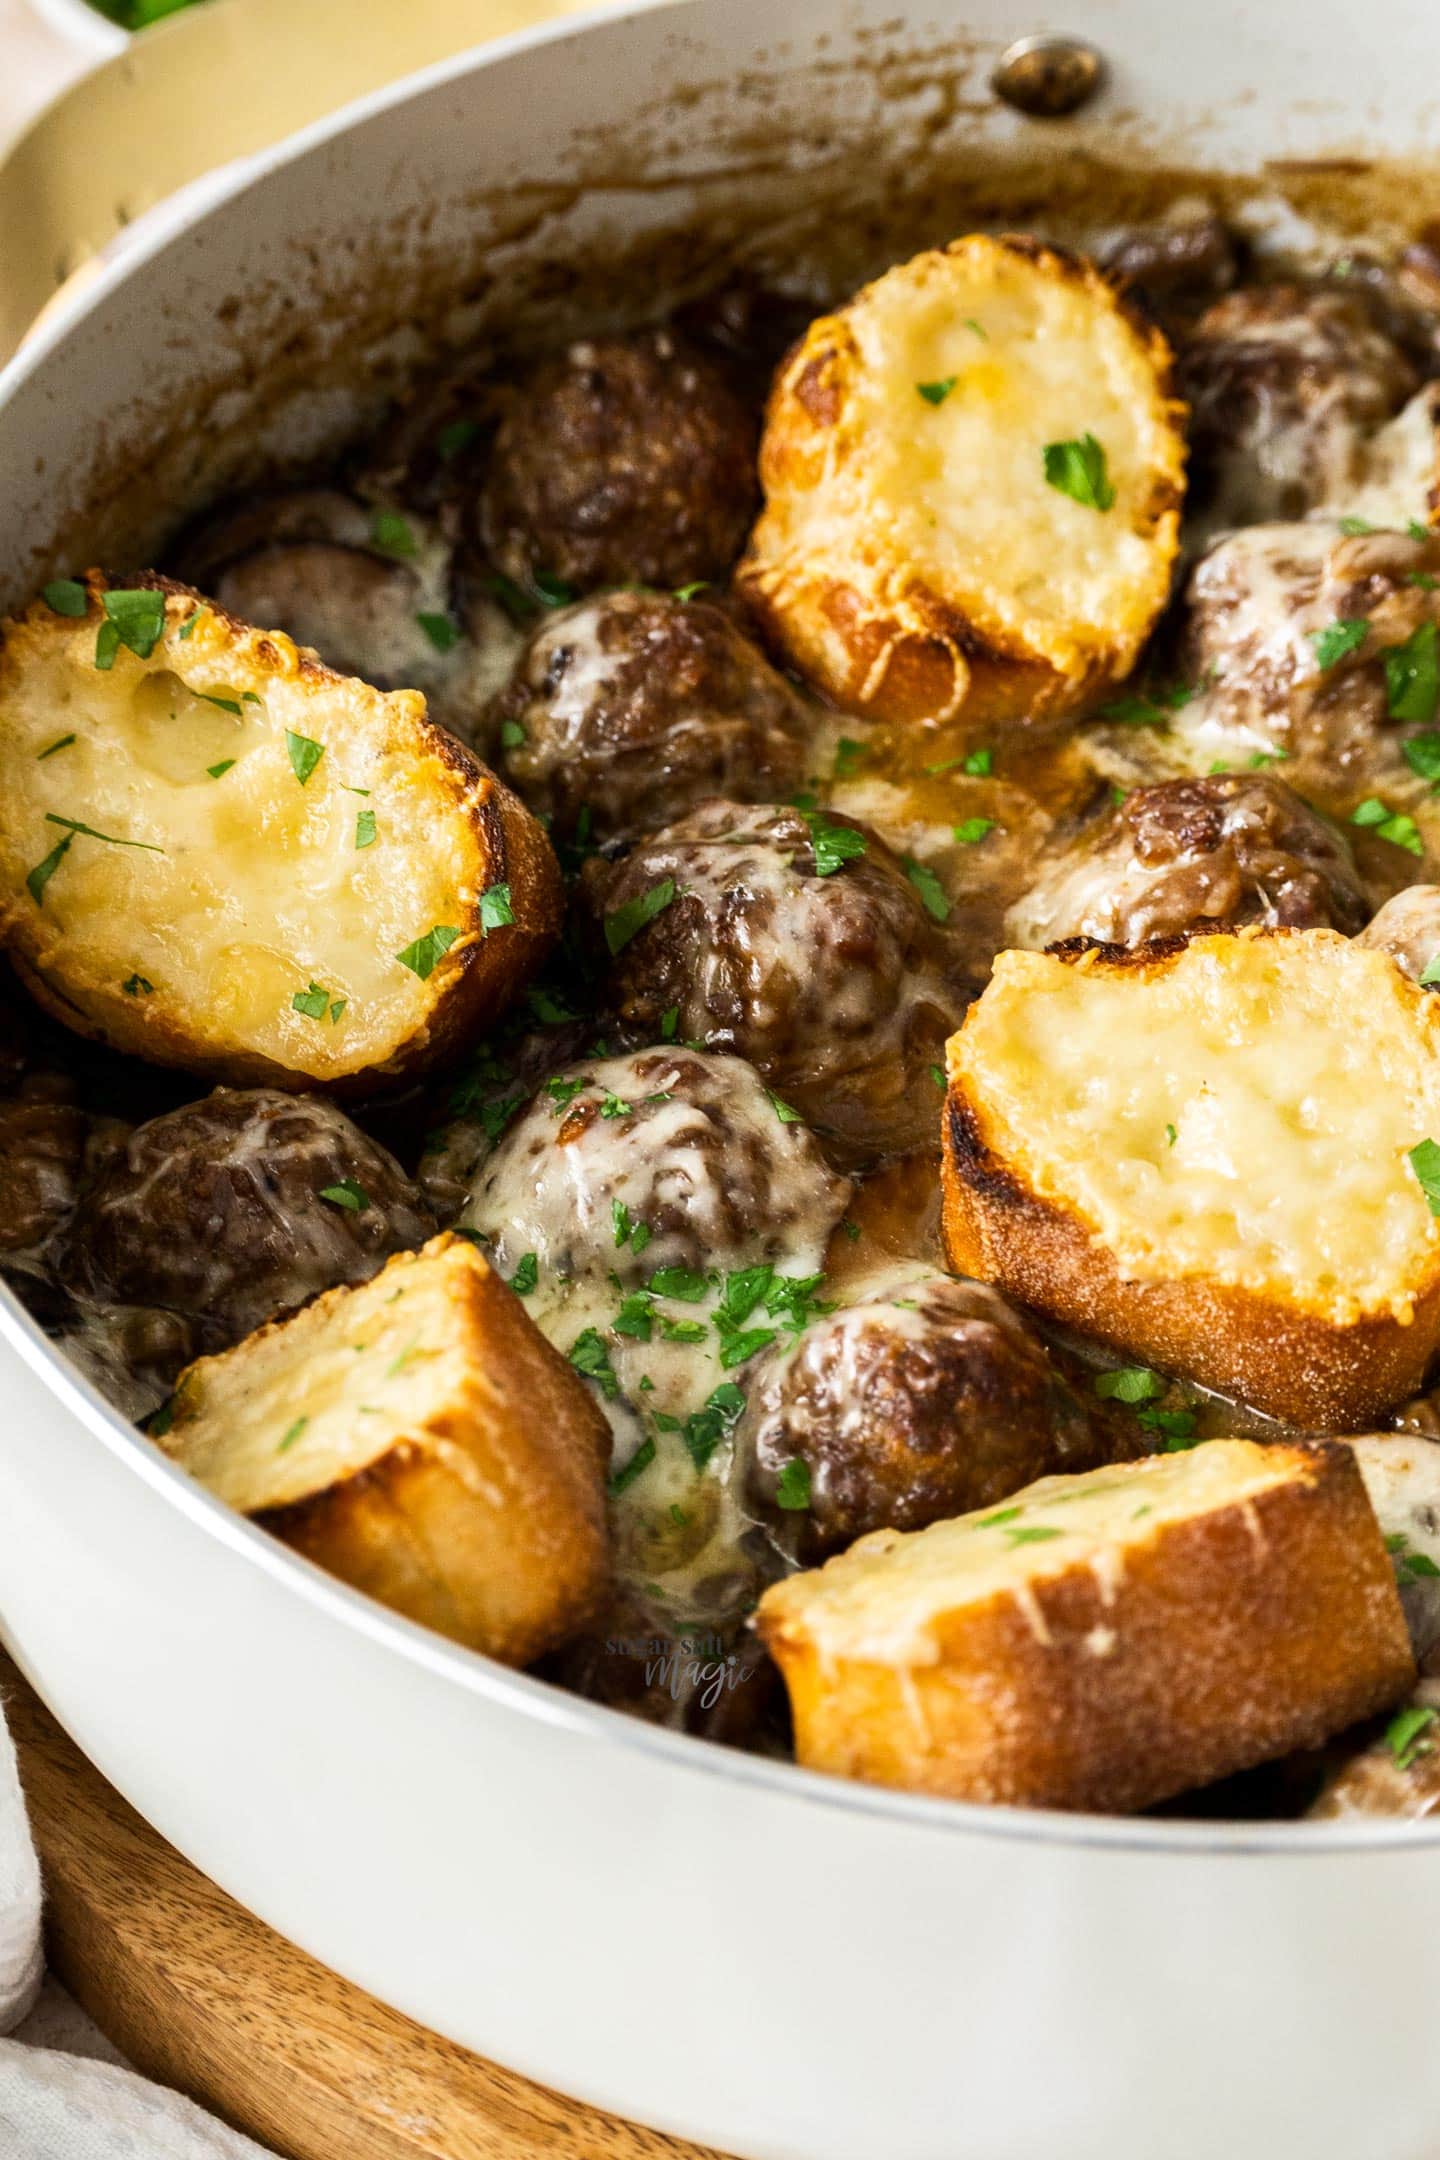 Closeup of the French onion meatballs with melted cheese over the top.